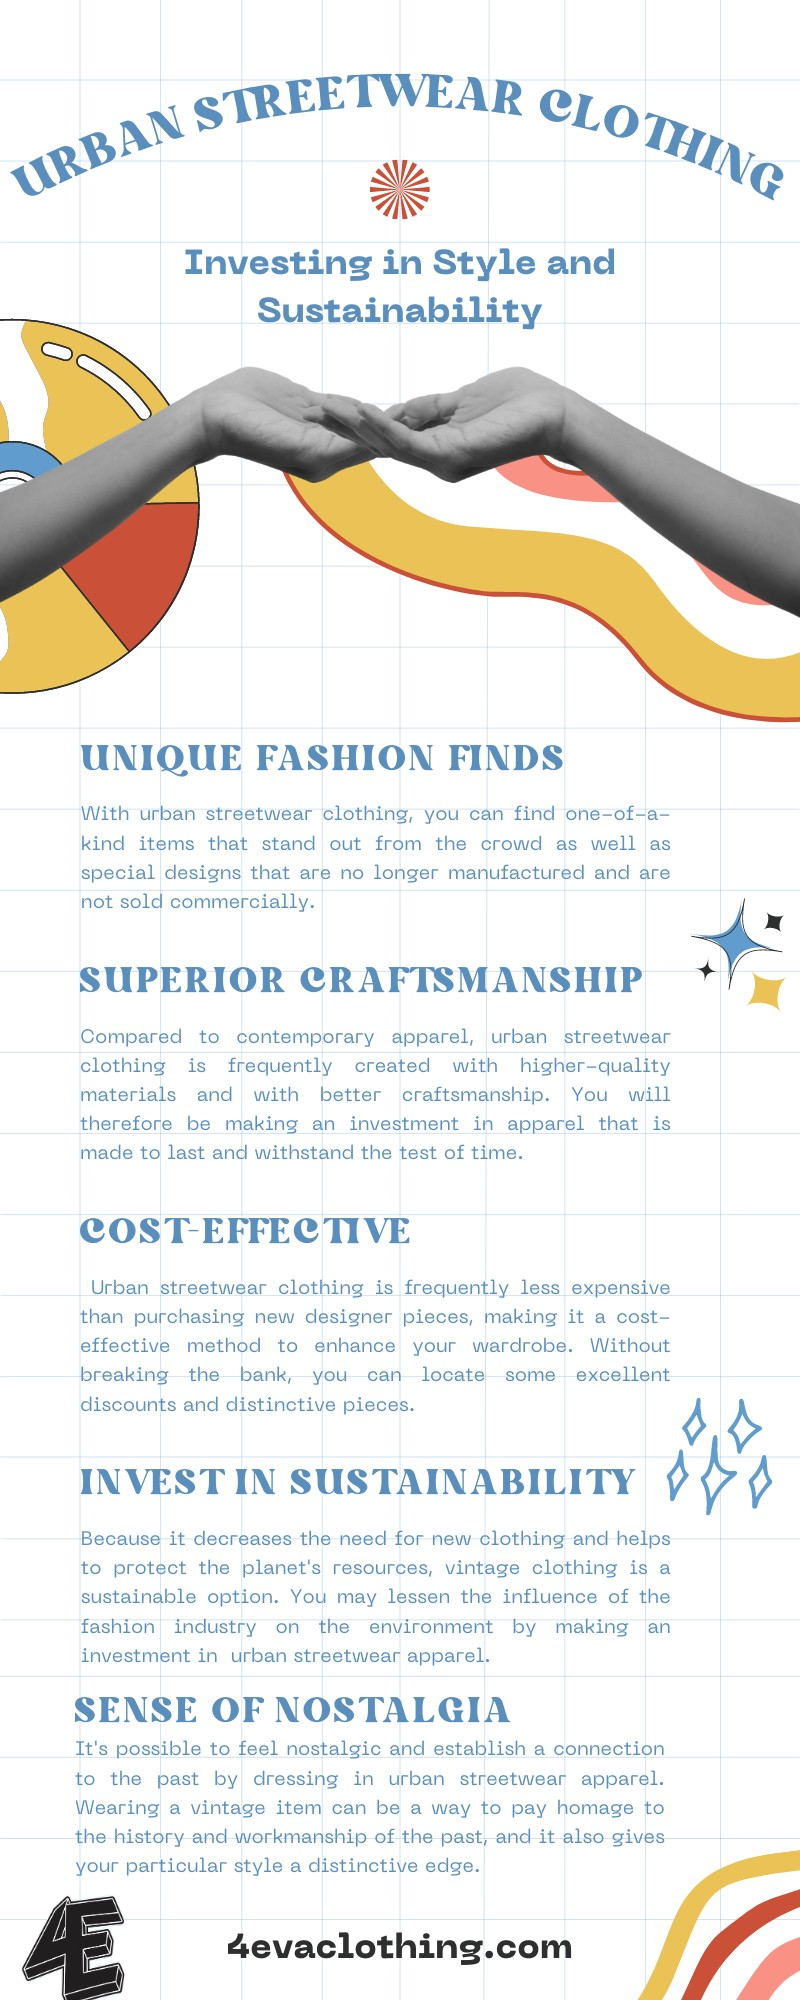 Urban Streetwear Clothing : Investing in Style and Sustainability [Infographic]